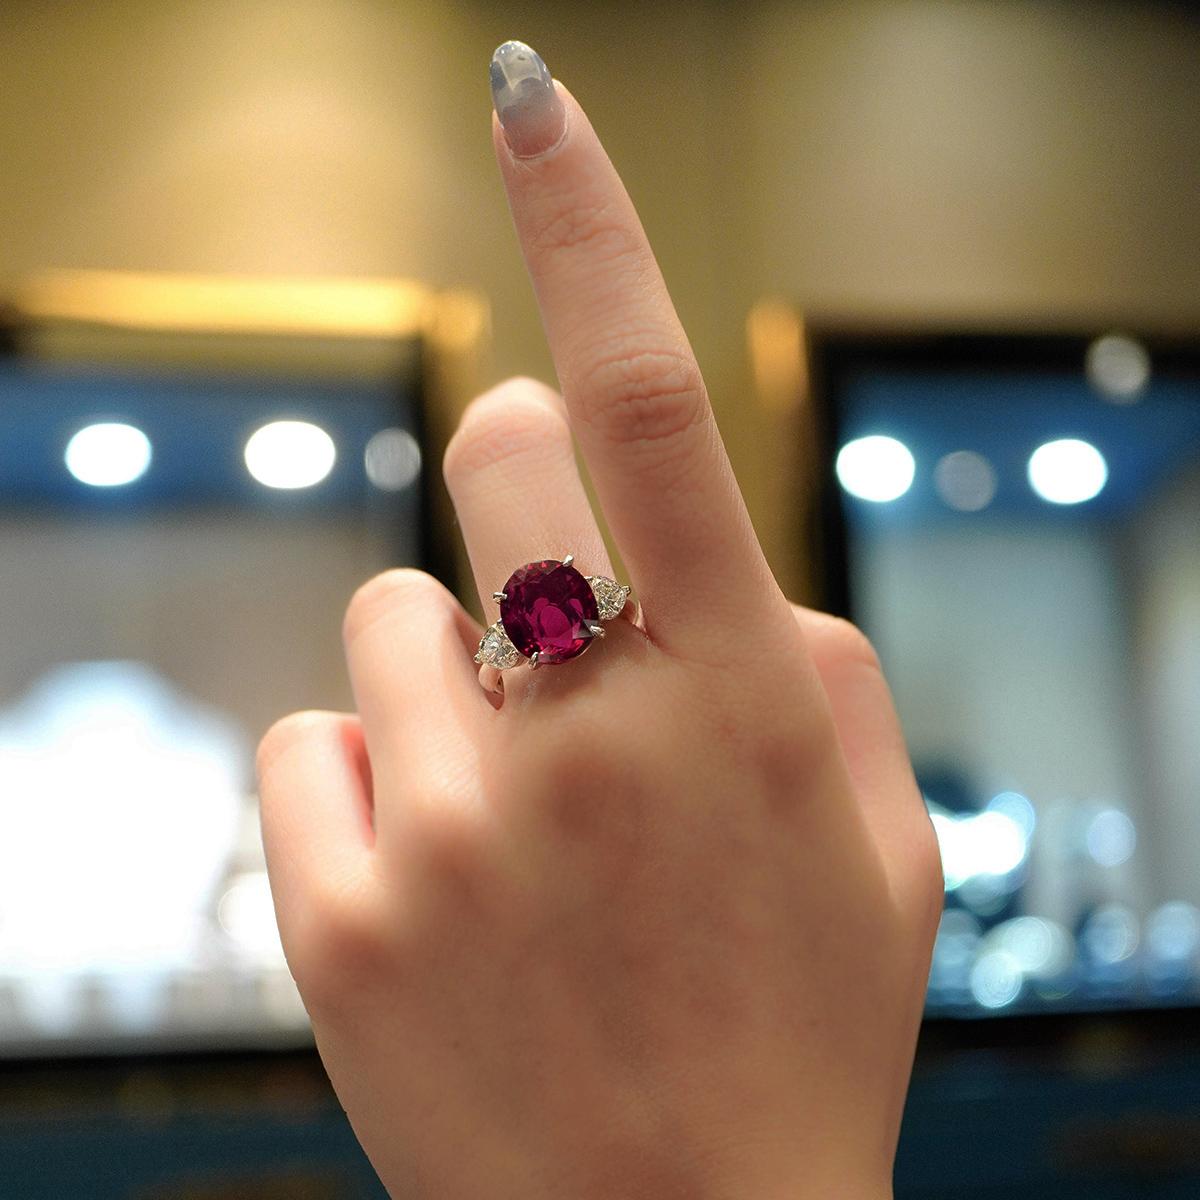 First referenced in 1408, Thai Ruby once fulfilled 95 percent of the world's demand for this extremely rare and highly coveted gemstone. Ostensibly depleted since 2009, Thai Ruby is impossibly rare, making it incredibly collectable. The ring has a